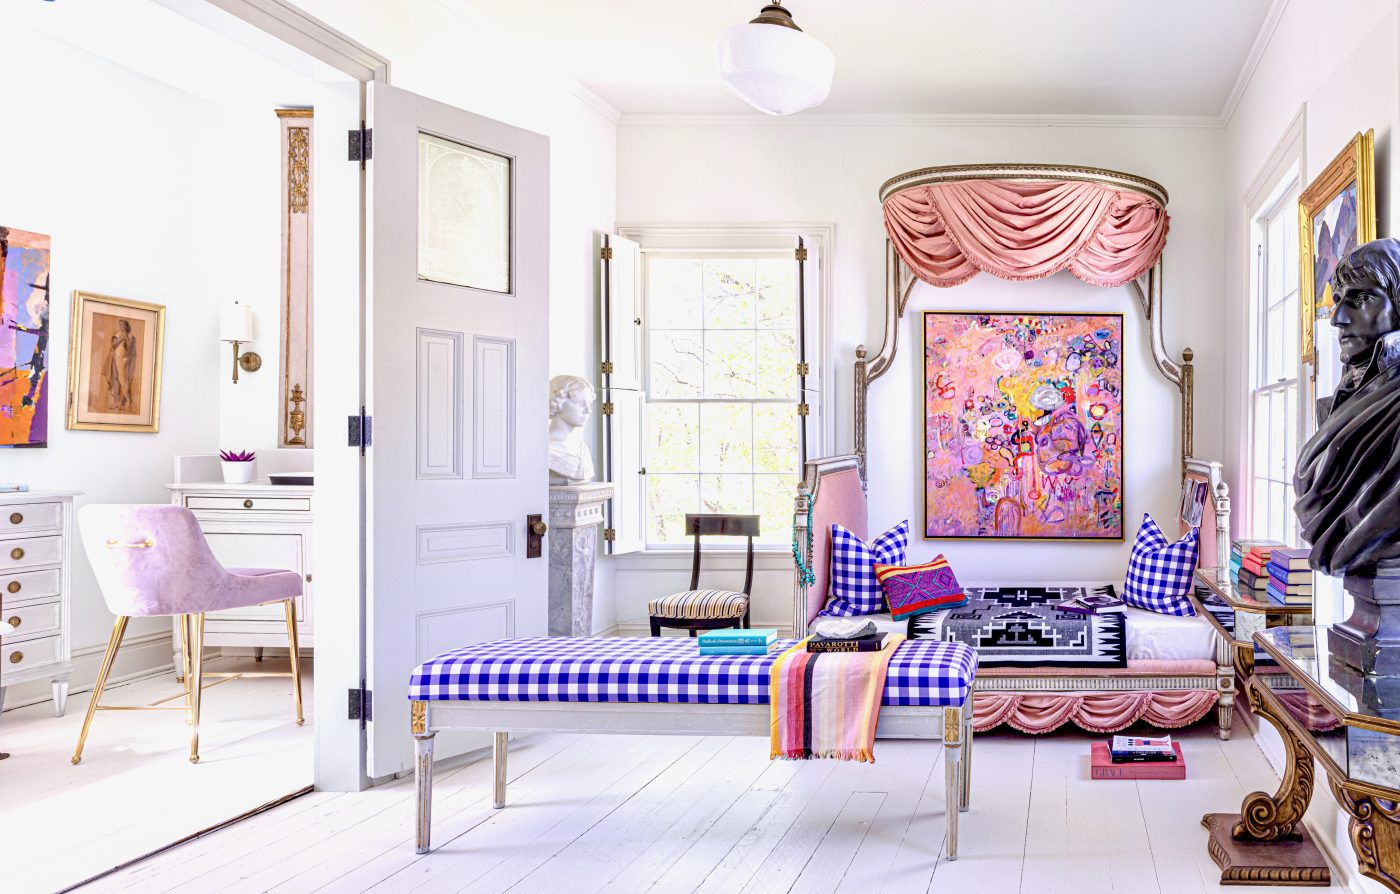 The pink and white lady's drawing room at Aderton, interior designer Kelee Katillac's historic home in Arrow Rock, Missouri